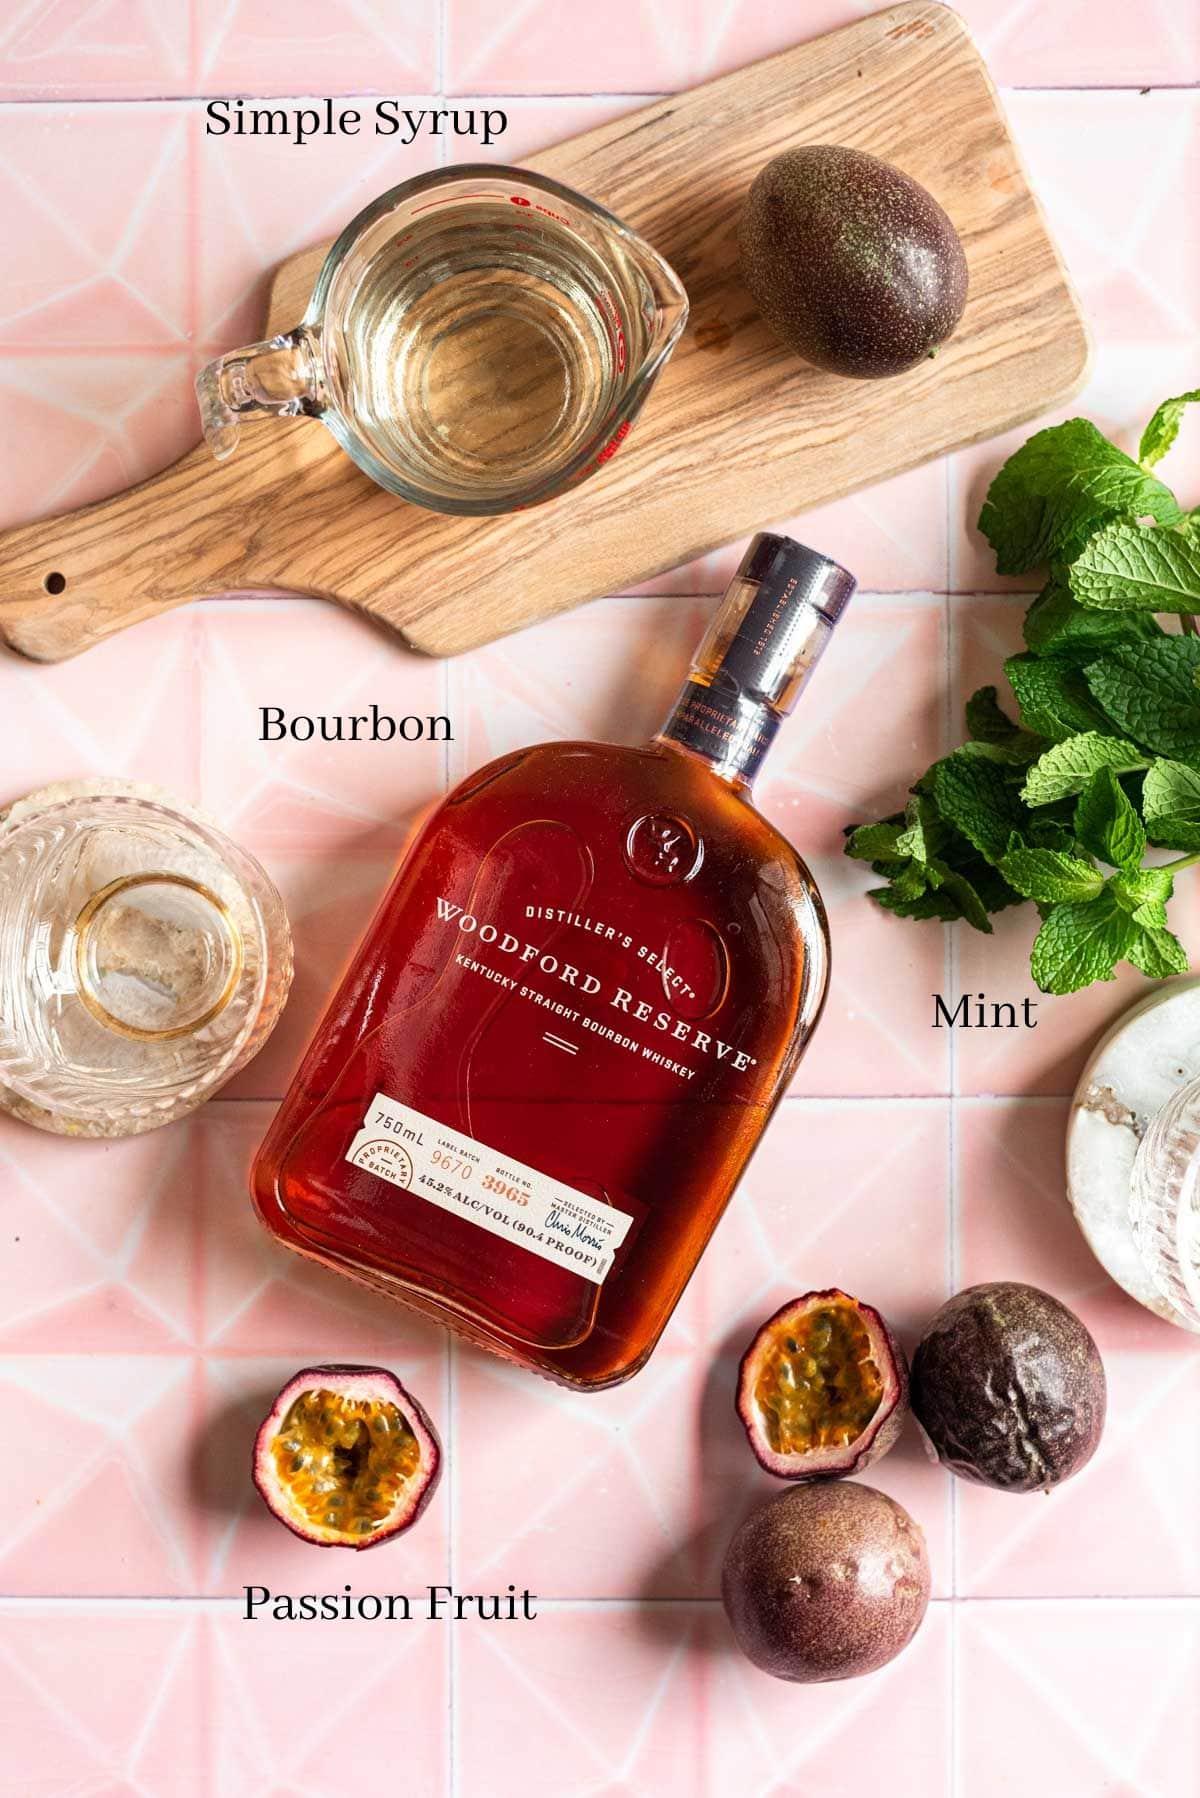 A bottle of Woodford Reserve bourbon surrounded by pass fruits, simple syrup and mint.